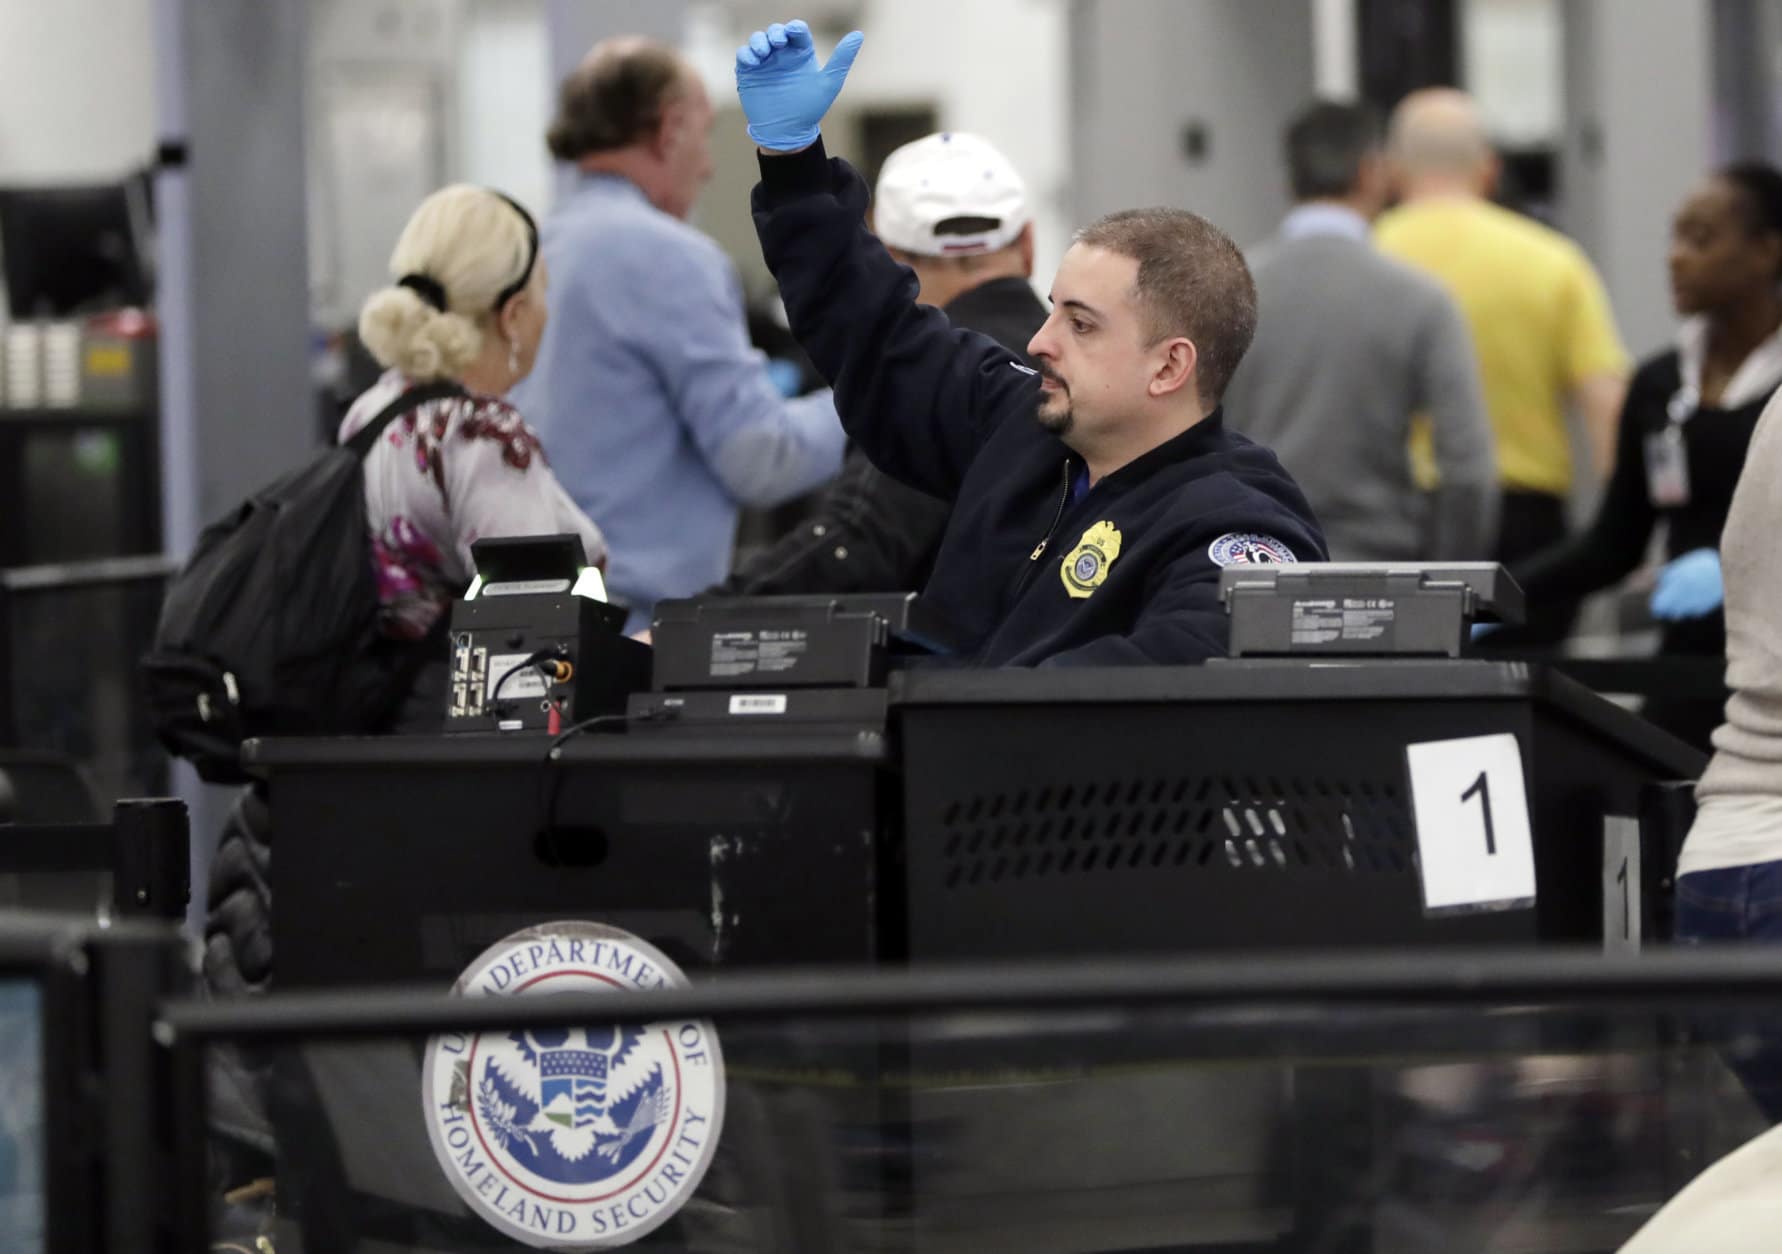 A Transportation Security Administration officer works at the entrance to Concourse G at Miami International Airport, Friday, Jan. 11, 2019, in Miami. The airport is closing Terminal G this weekend as the federal government shutdown stretches toward a fourth week because security screeners have been calling in sick at twice the airport's normal rate. (AP Photo/Lynne Sladky)